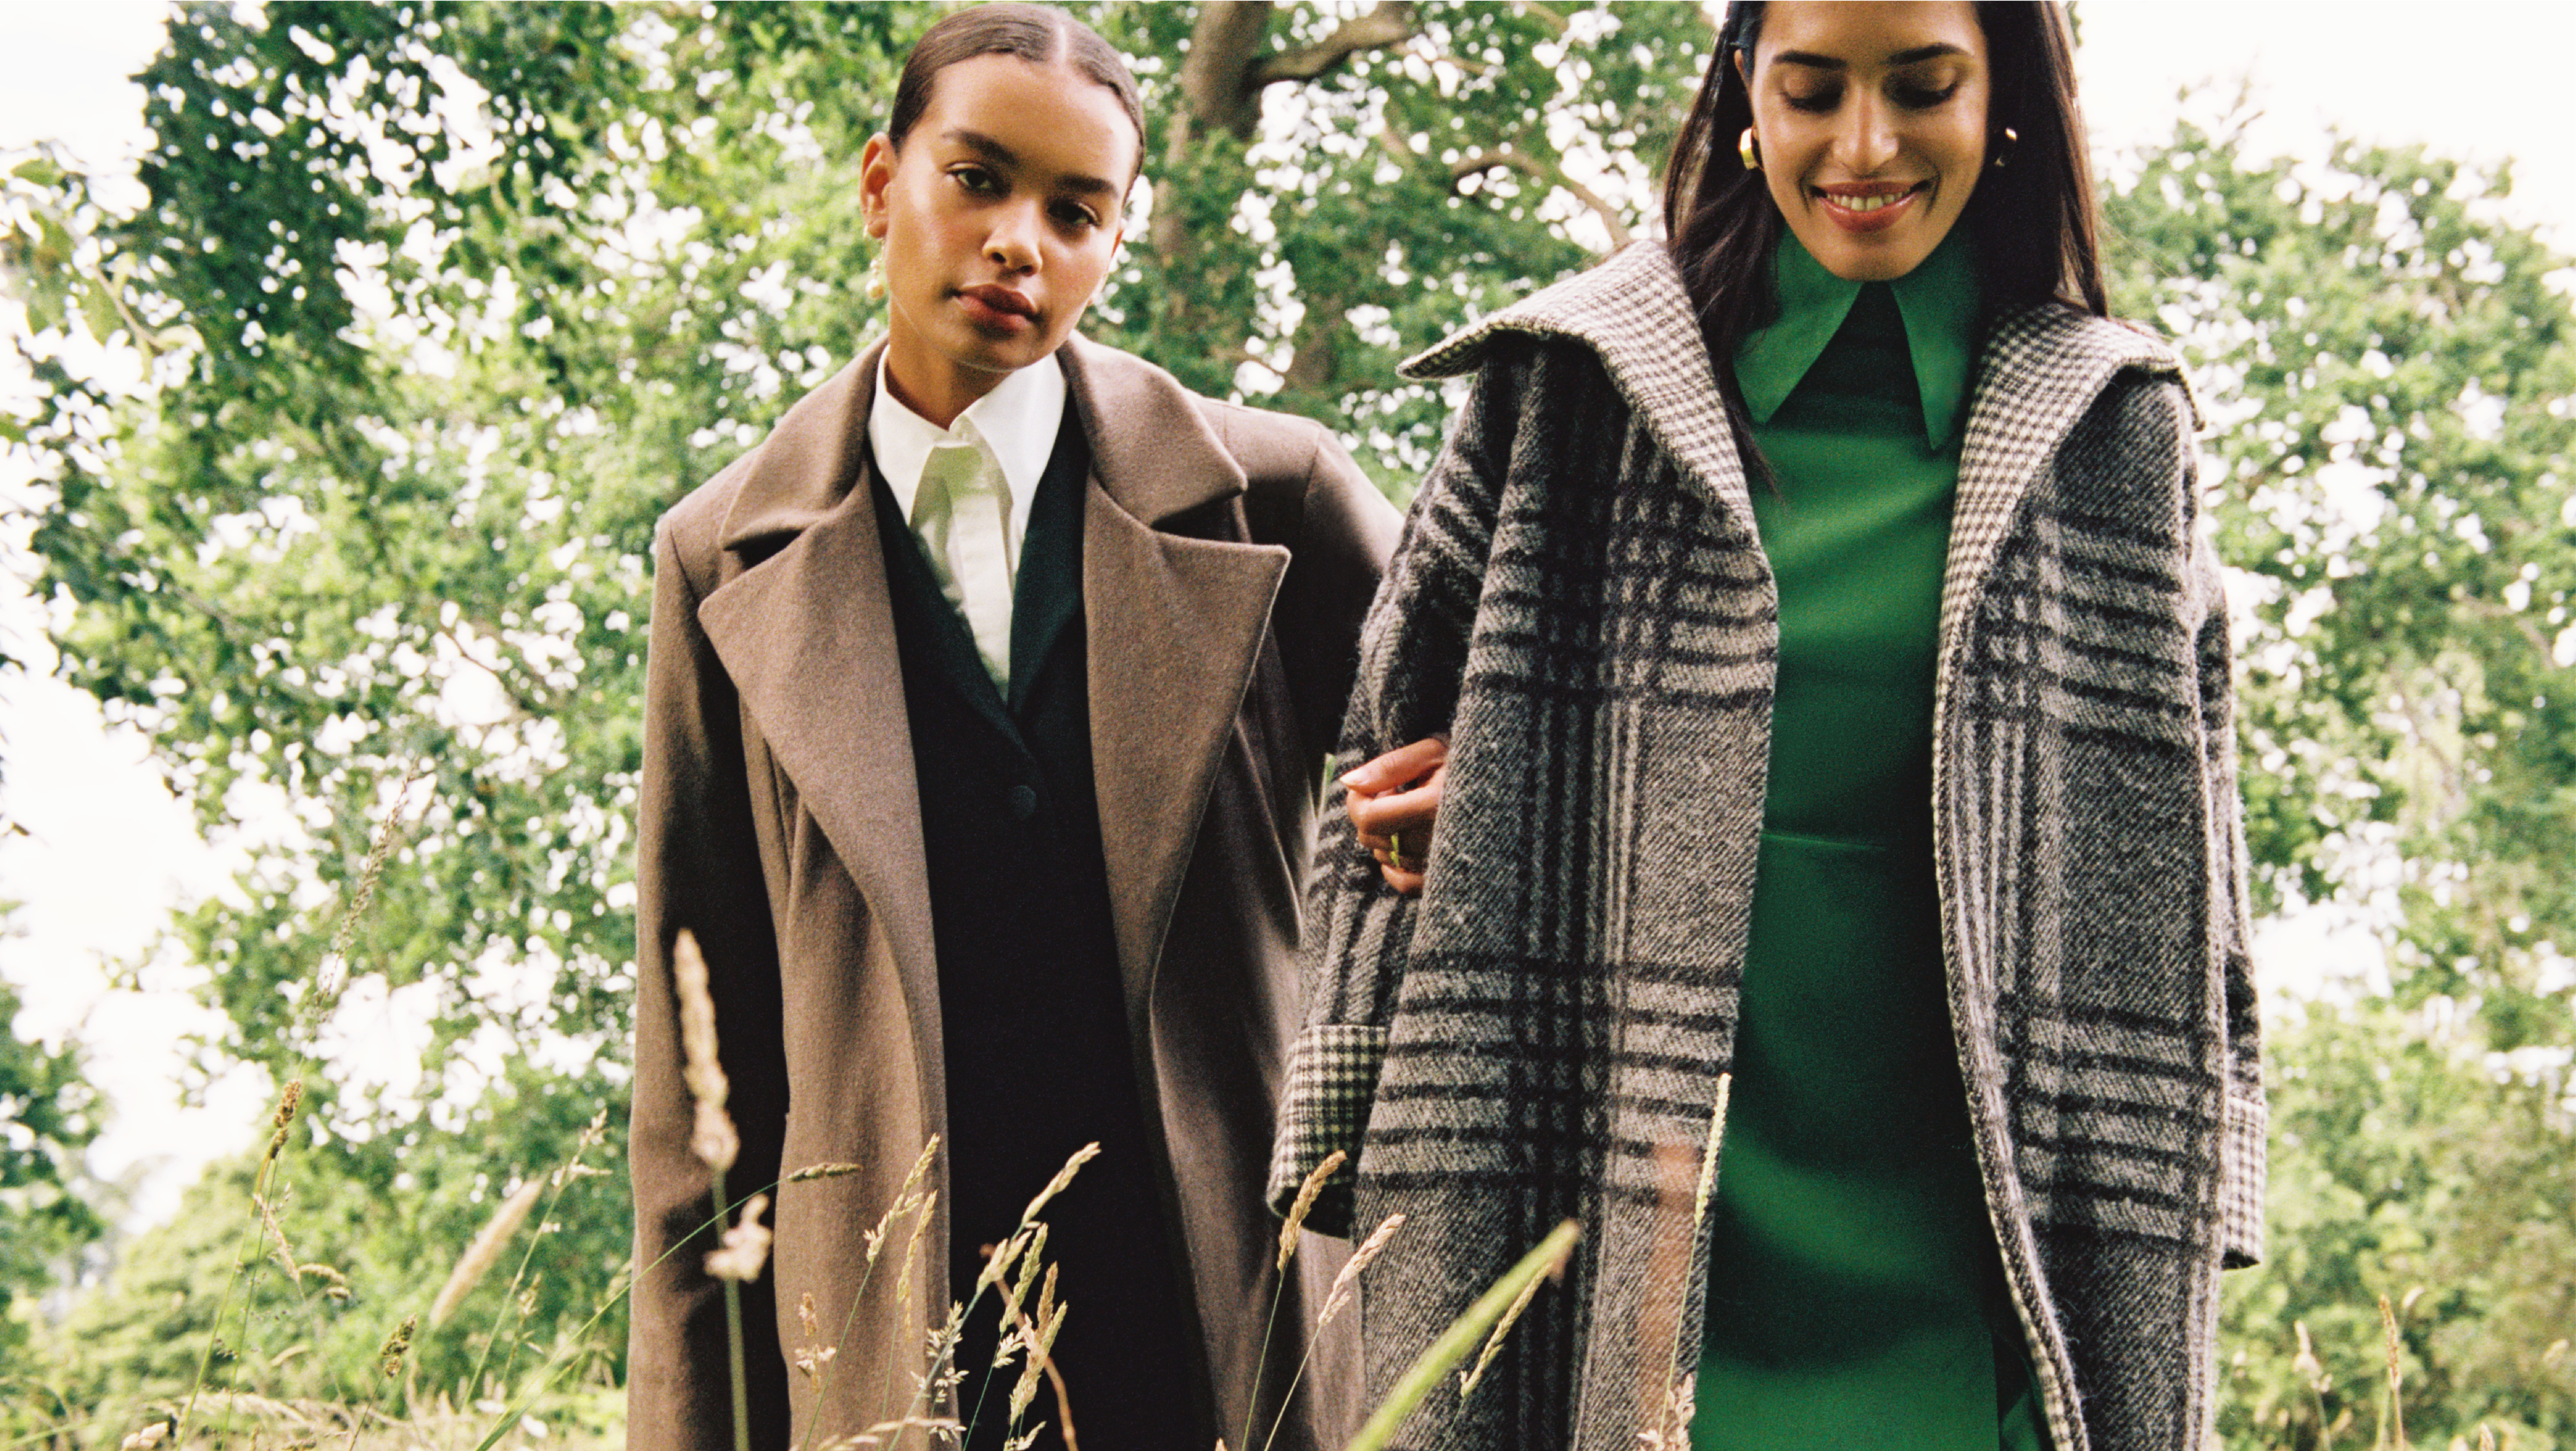 The cashmere coat and the check coat